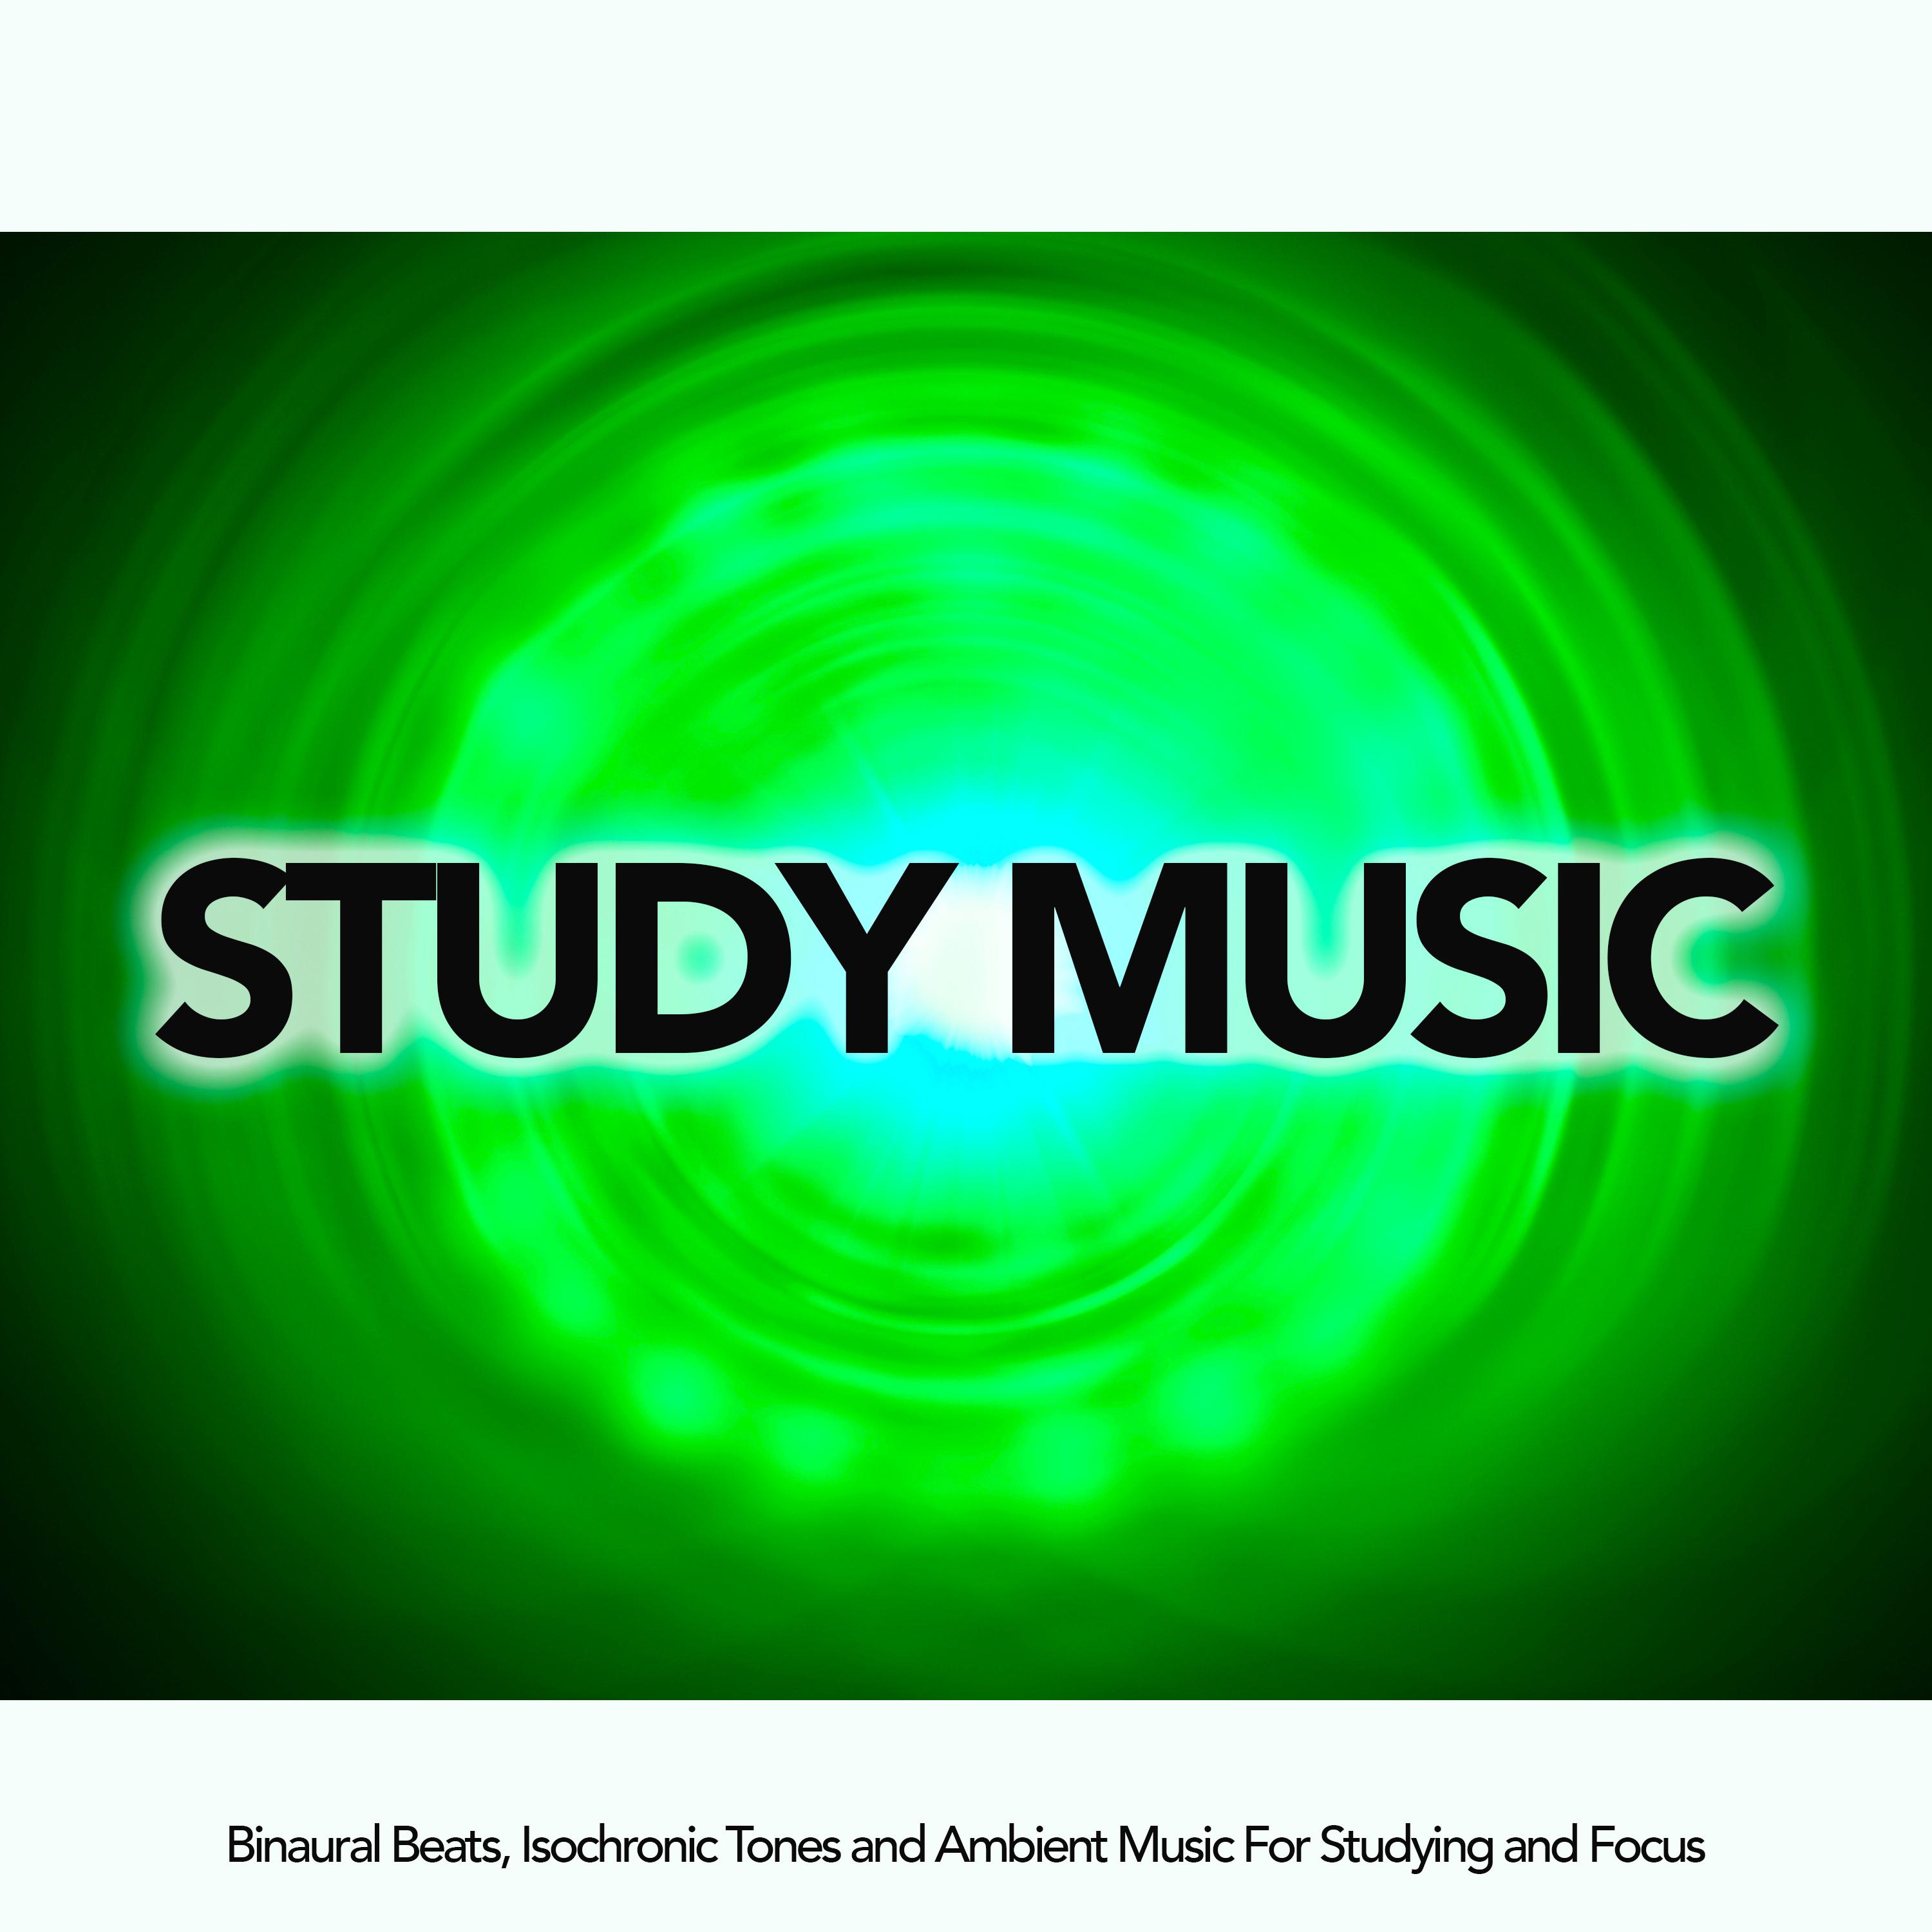 Study Music: Binaural Beats, Isochronic Tones and Ambient Music For Studying and Focus